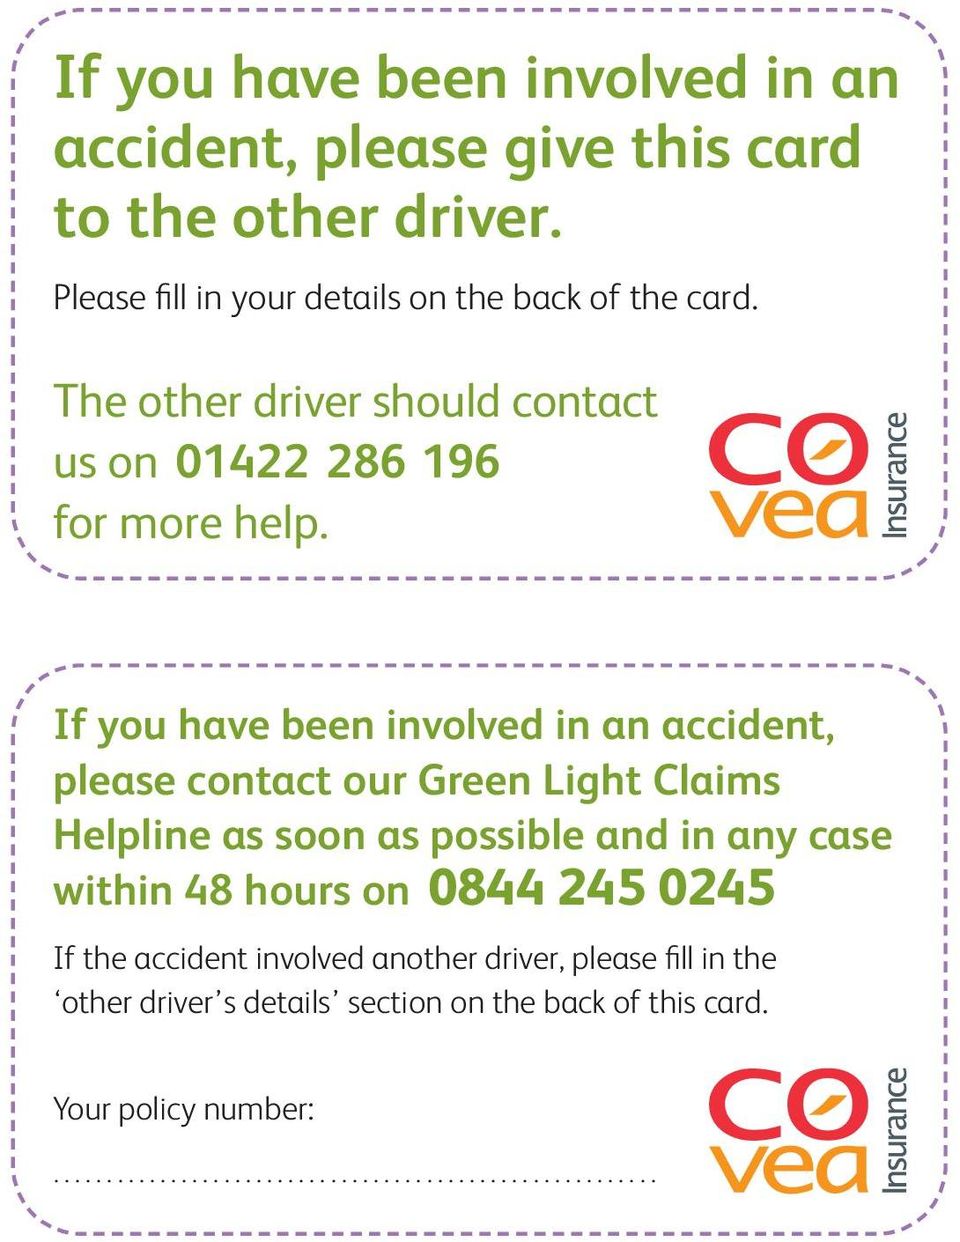 If you have been involved in an accident, please contact our Green Light Claims Helpline as soon as possible and in any case within 48